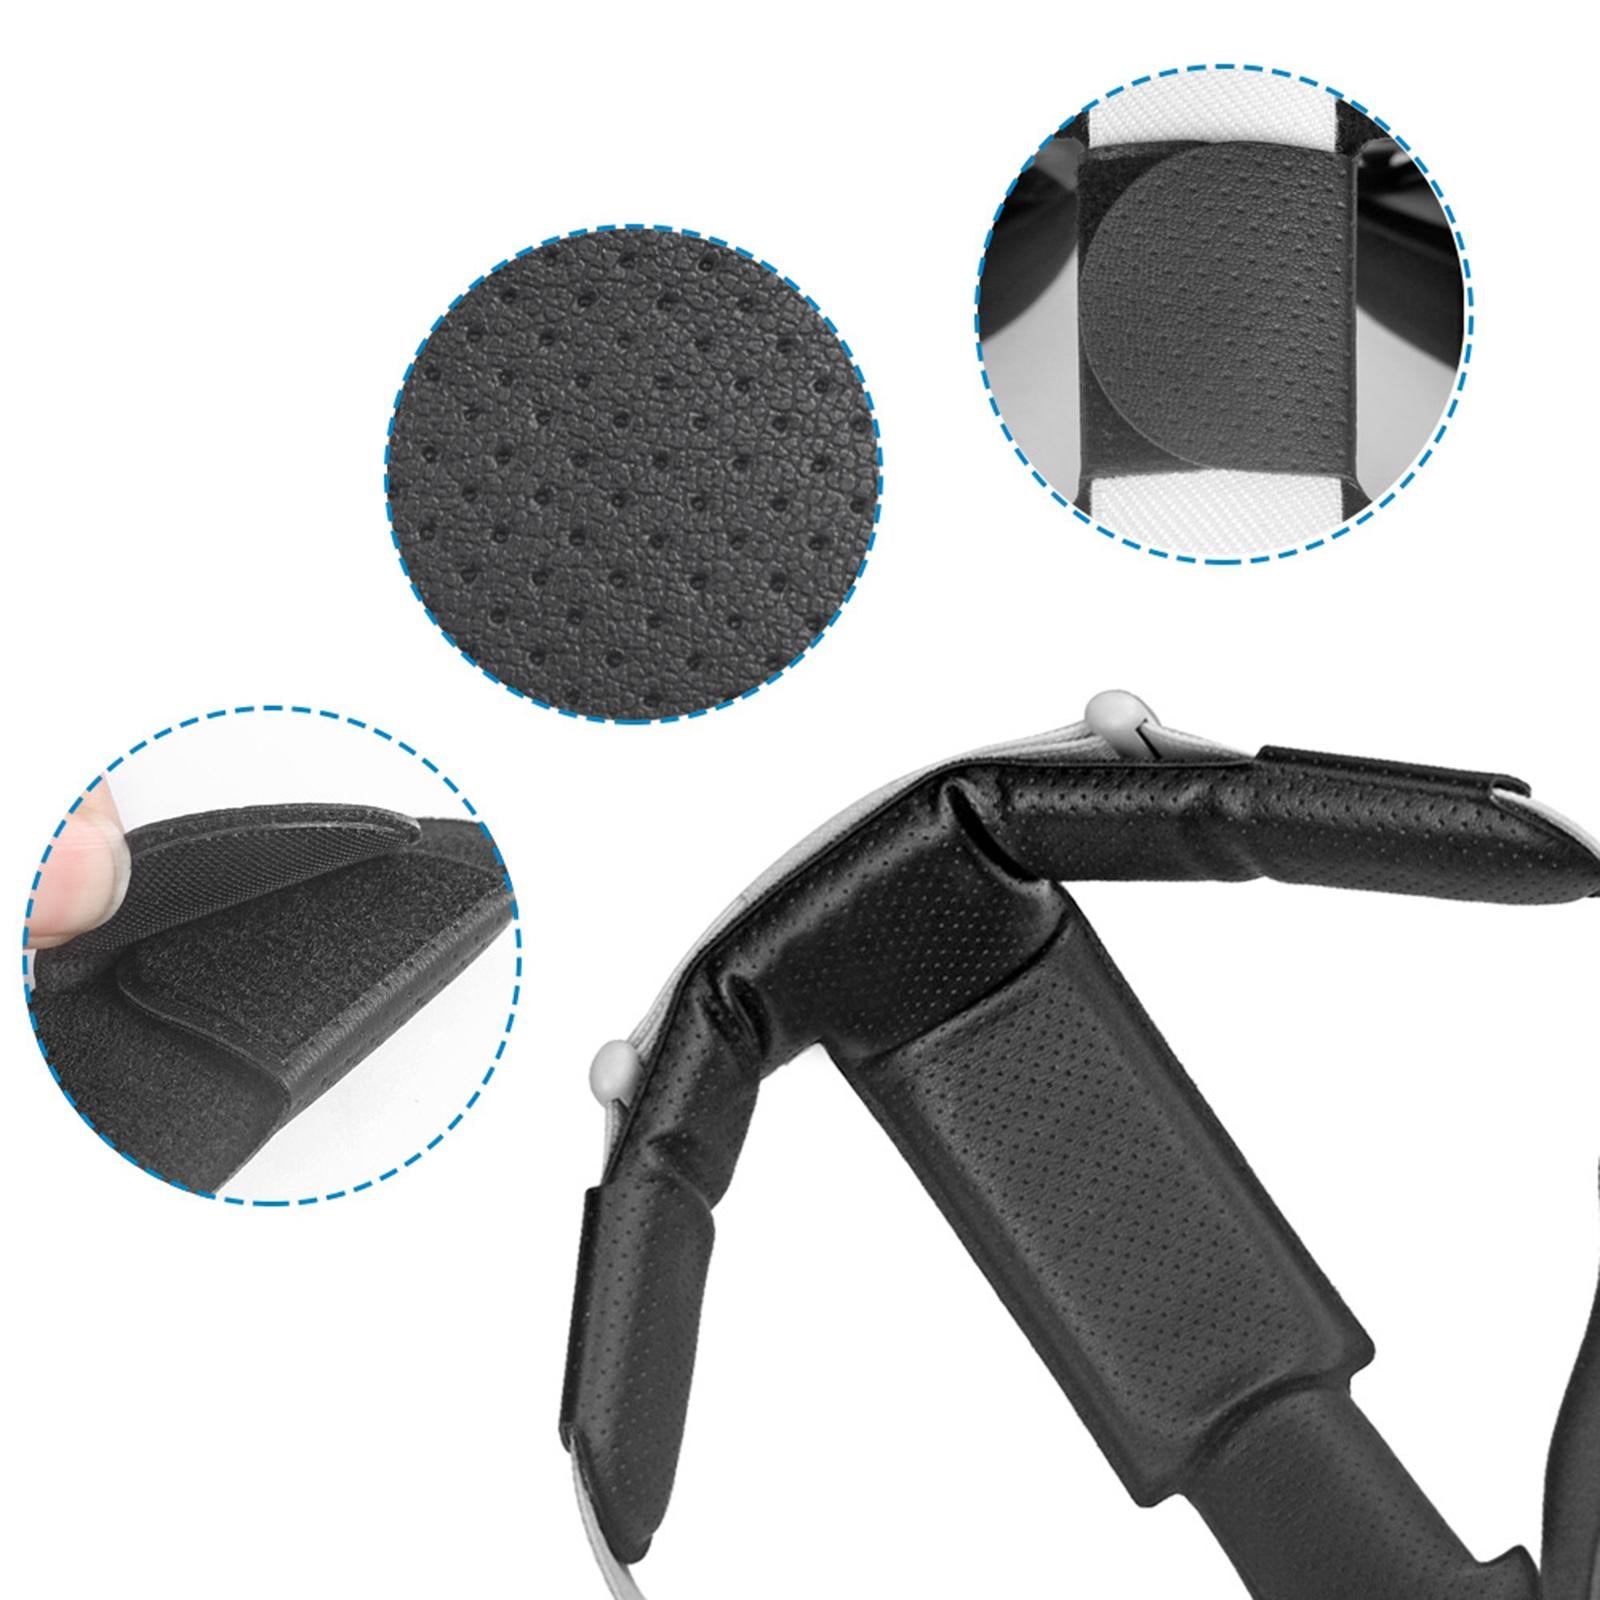 PU Leather Head Strap Pad Adjustable for Oculus Quest 2 Quick Cleaning Black